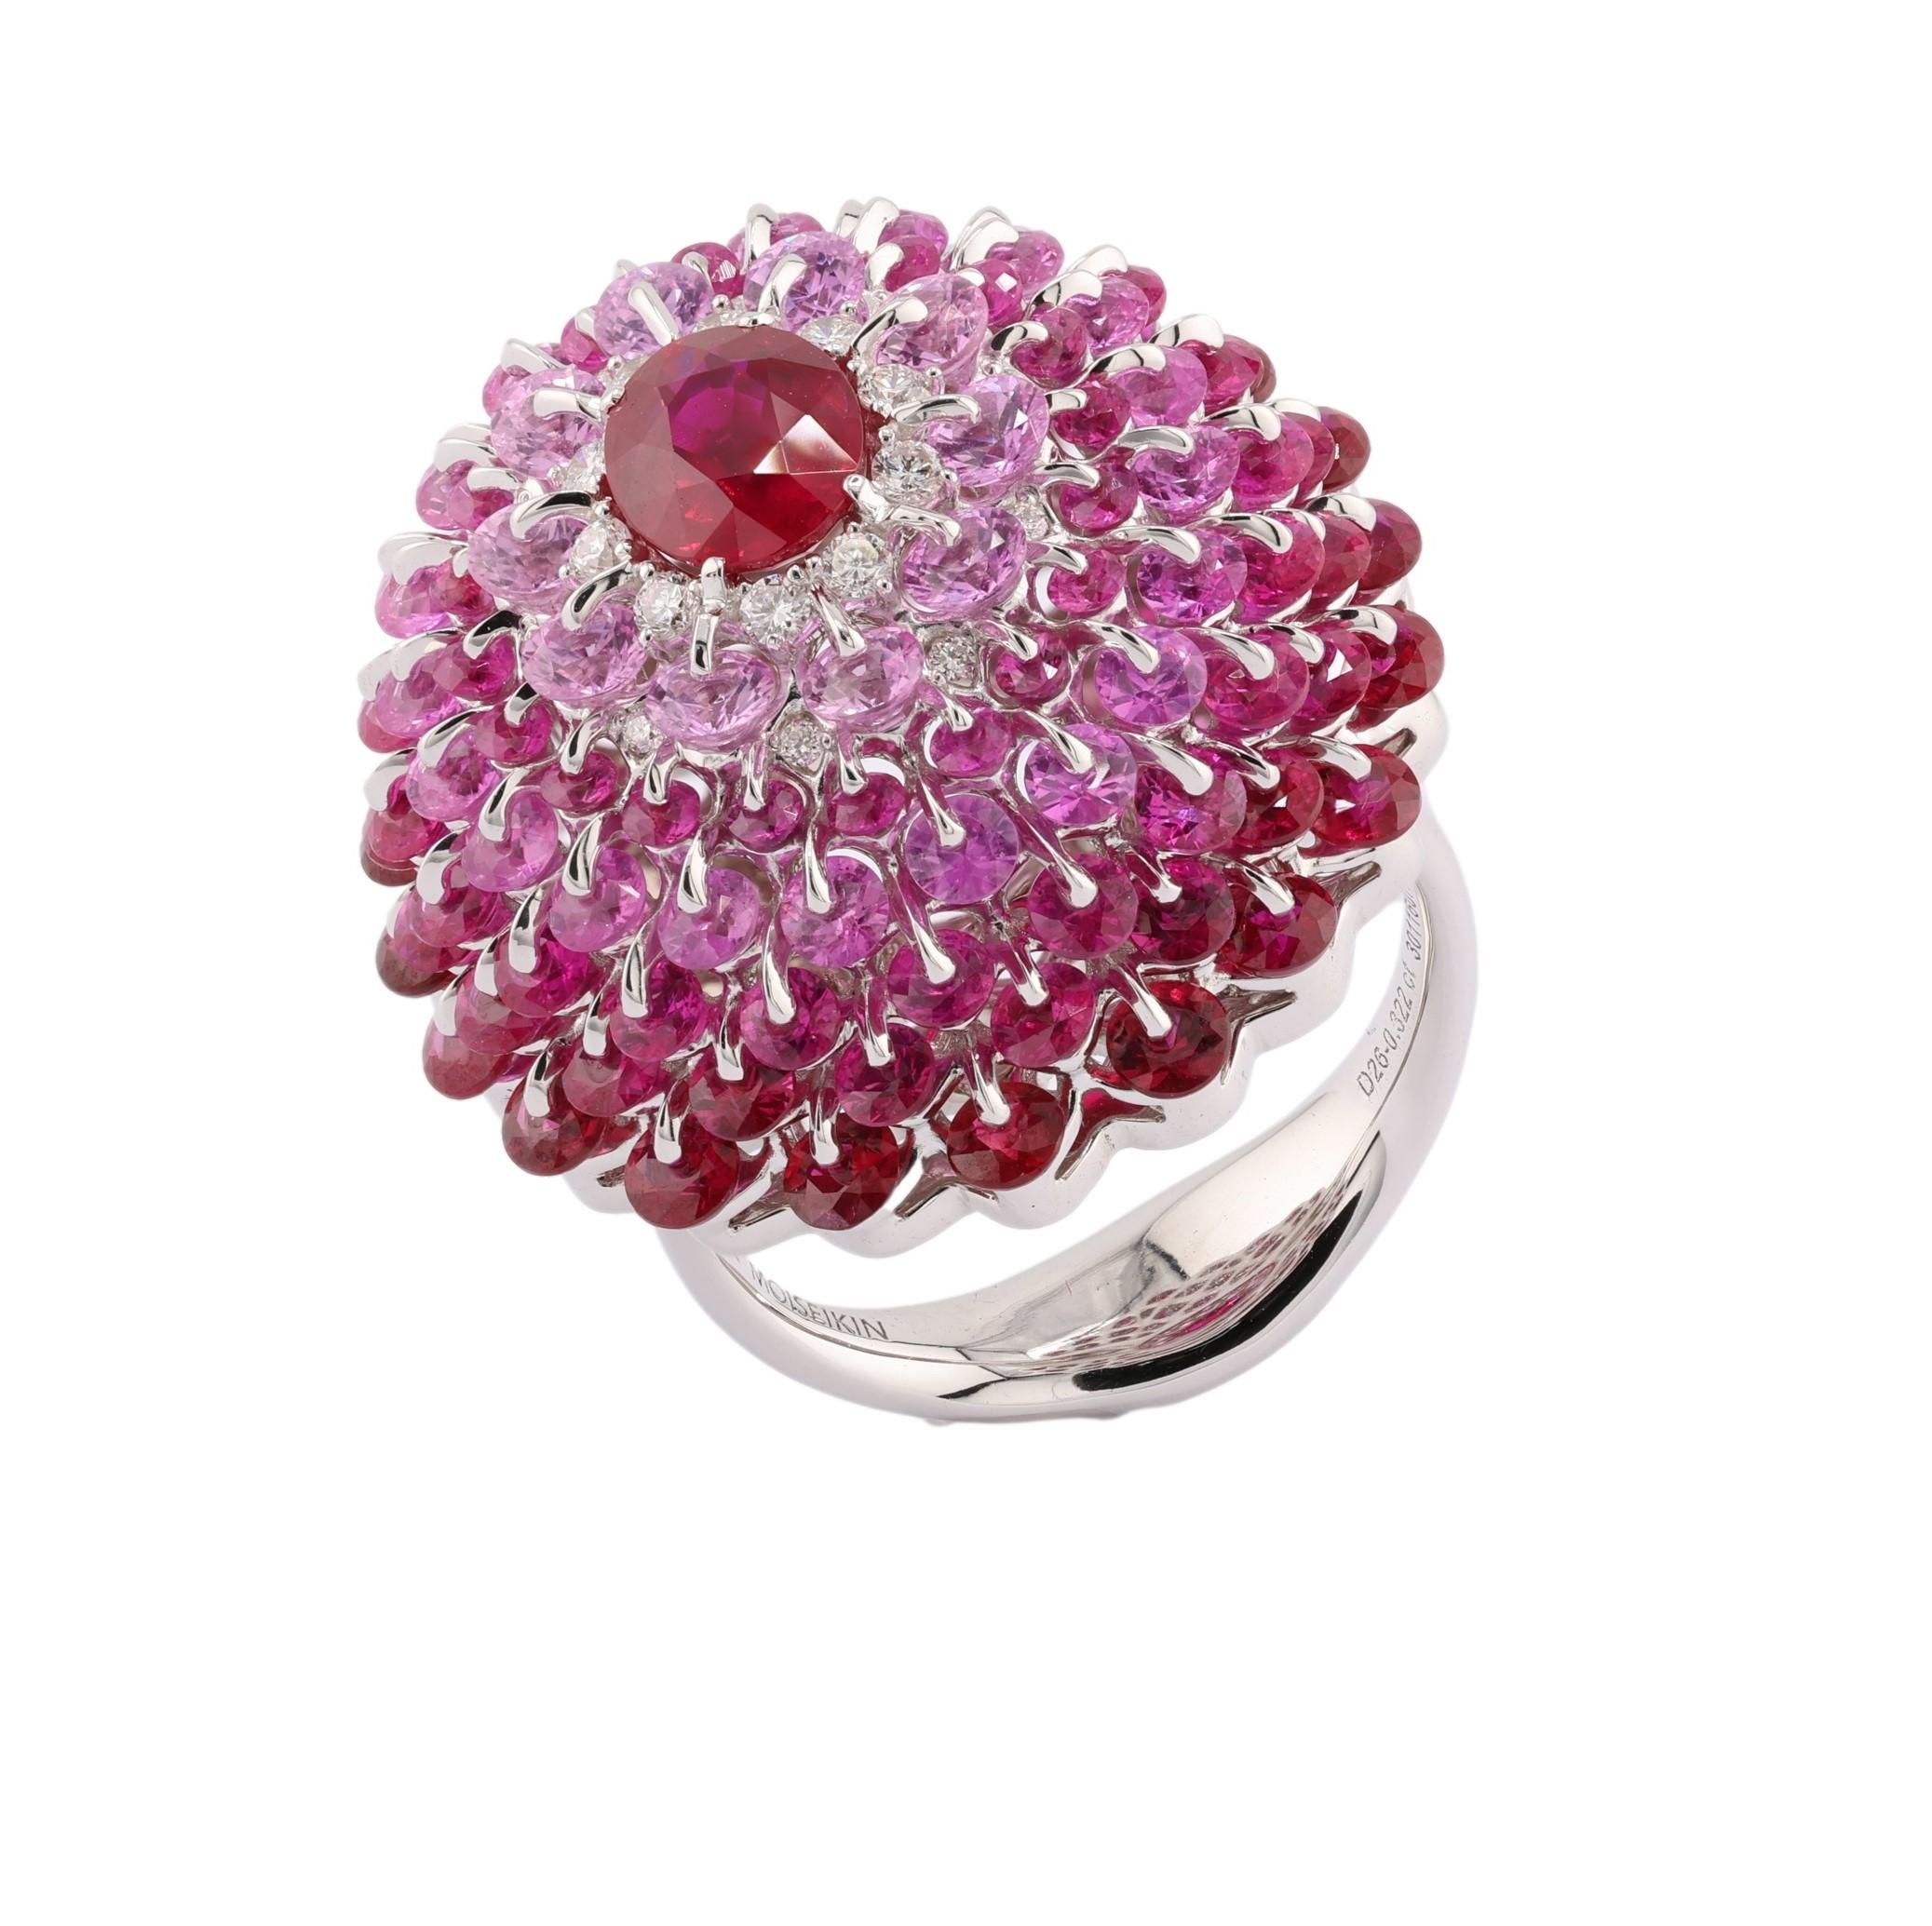 Rubies, pink sapphires and diamonds create a dynamic performance as a graceful ballerina with internationally patented stone technology. Exclusively selected, 1.22ct Burmese Ruby, known for its intensive colour, is decorated with the perfect